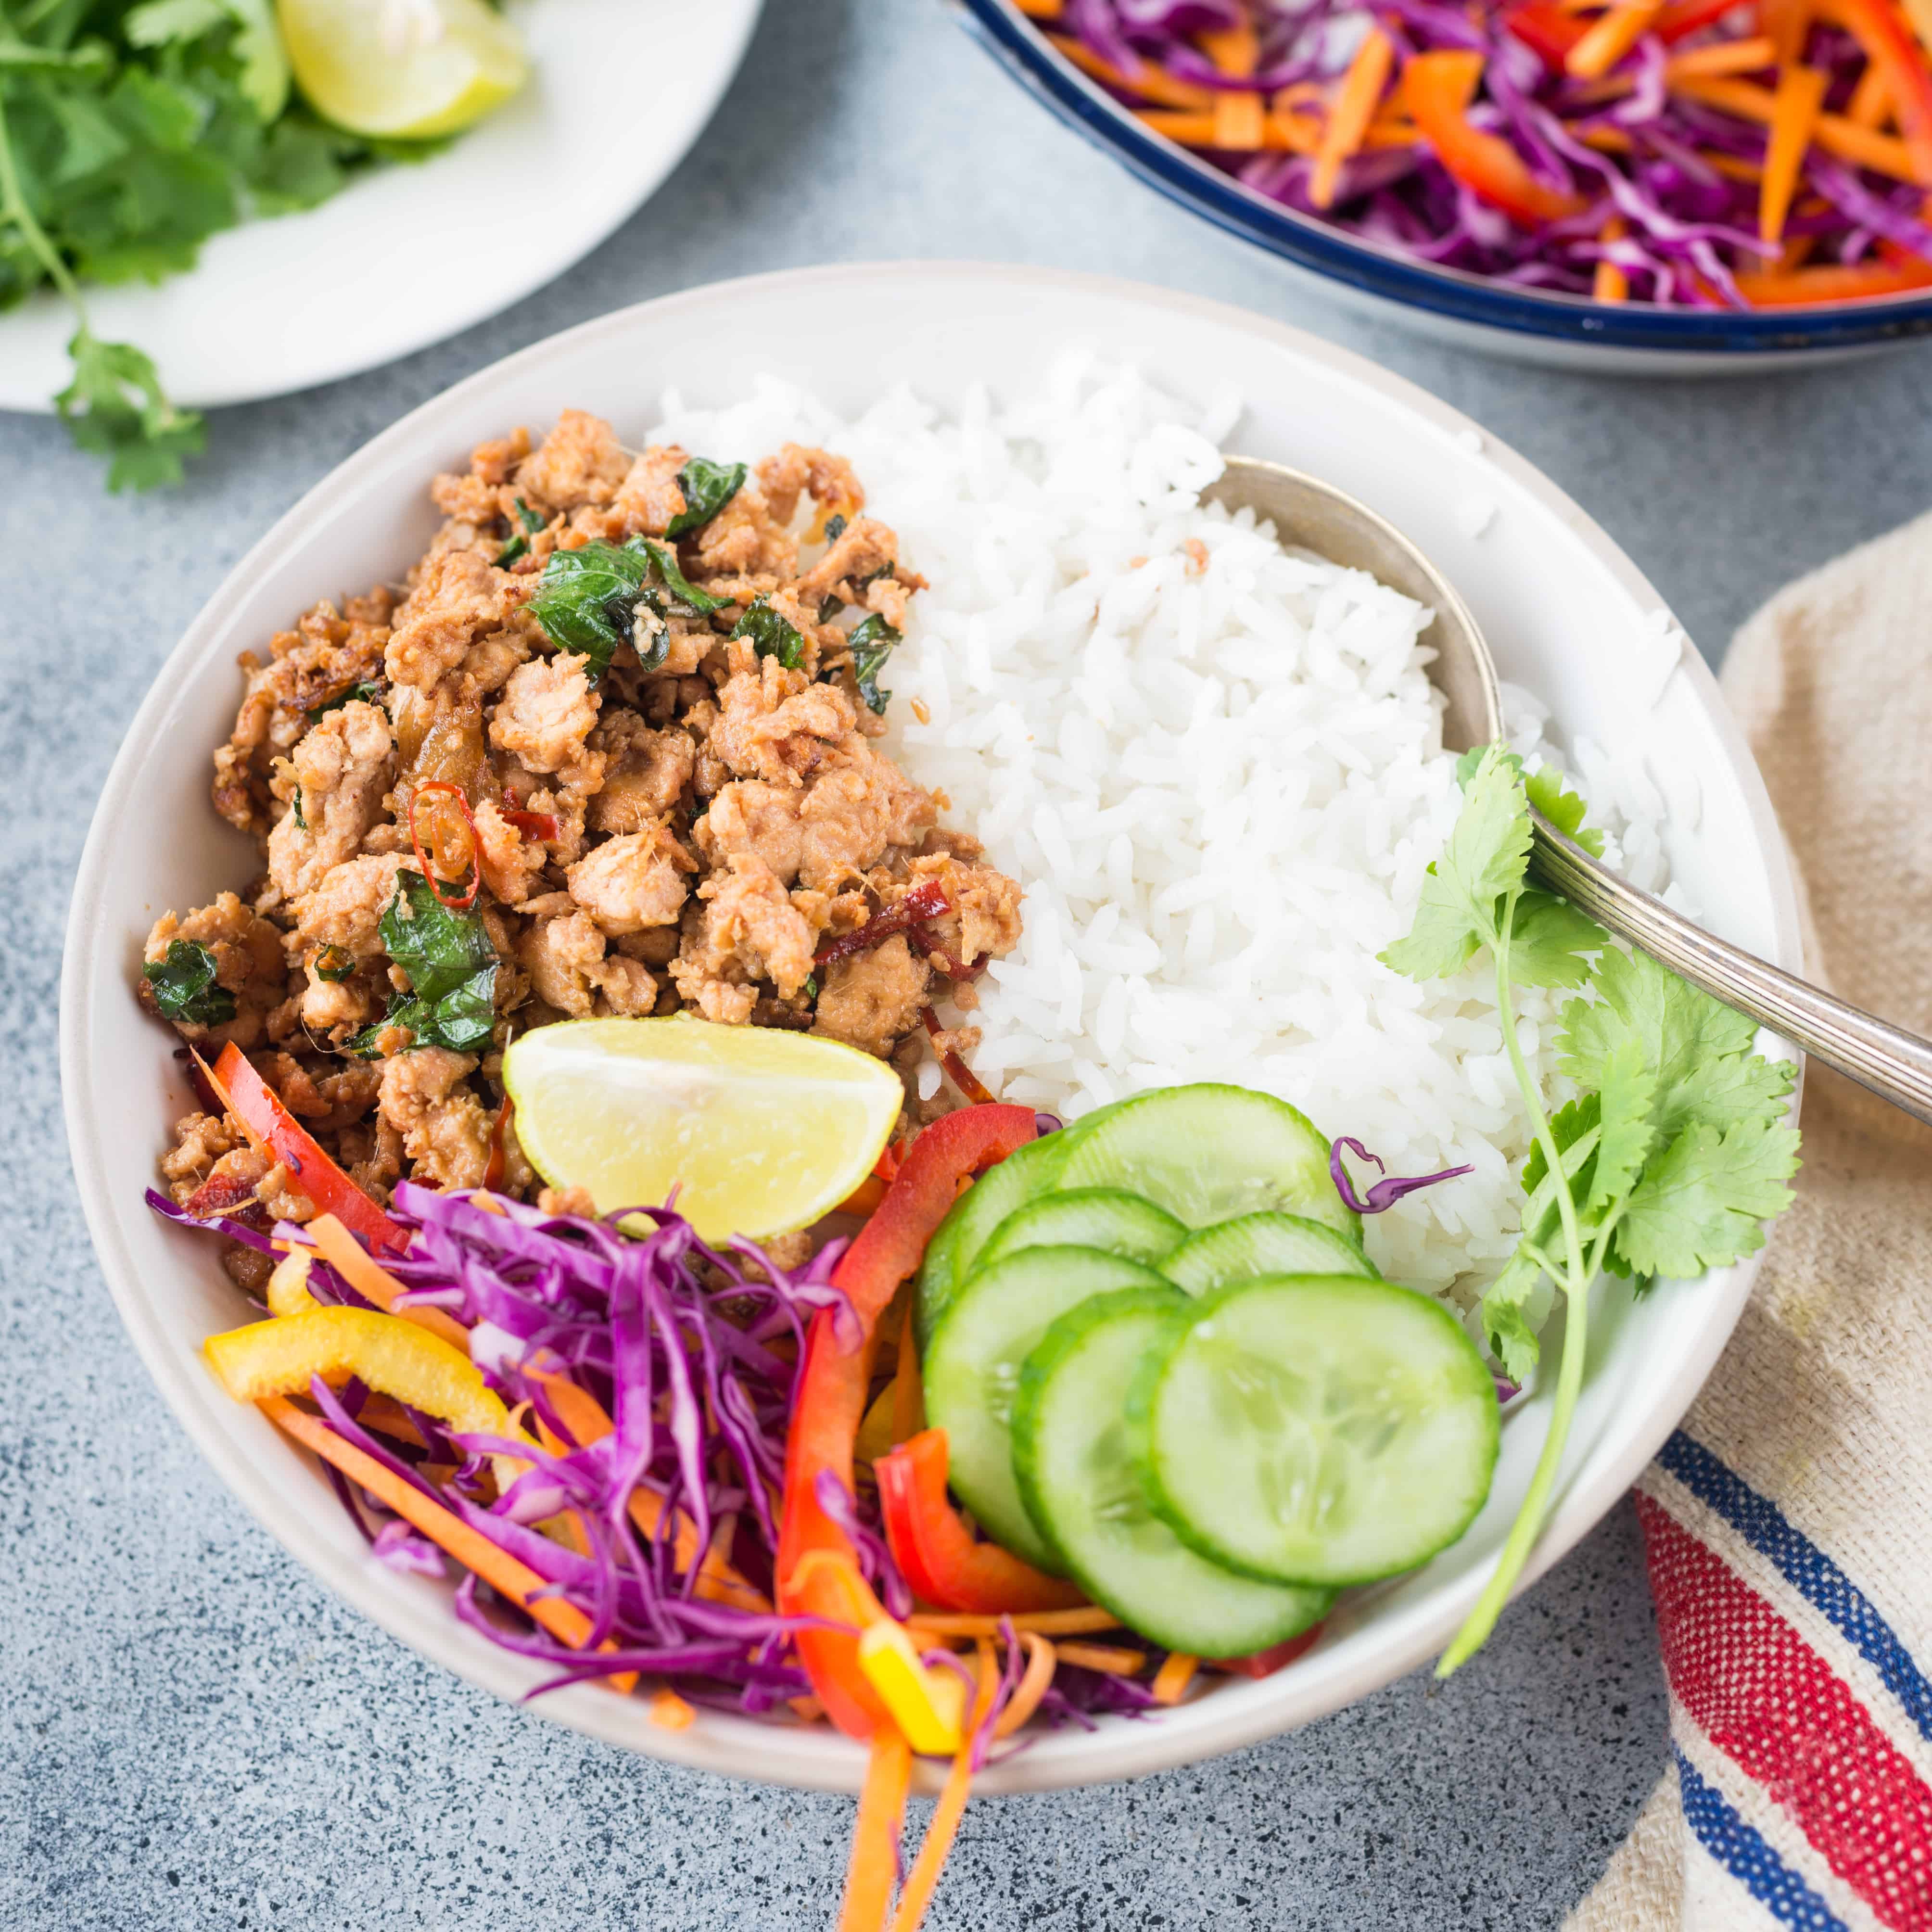 Thai Basil Chicken, this stir fry is spicy, flavourful with real Thai flavour from Thai basil and takes only 15 minutes to make. Serve it with a bowl of jasmine rice and a fried egg or fresh salad.